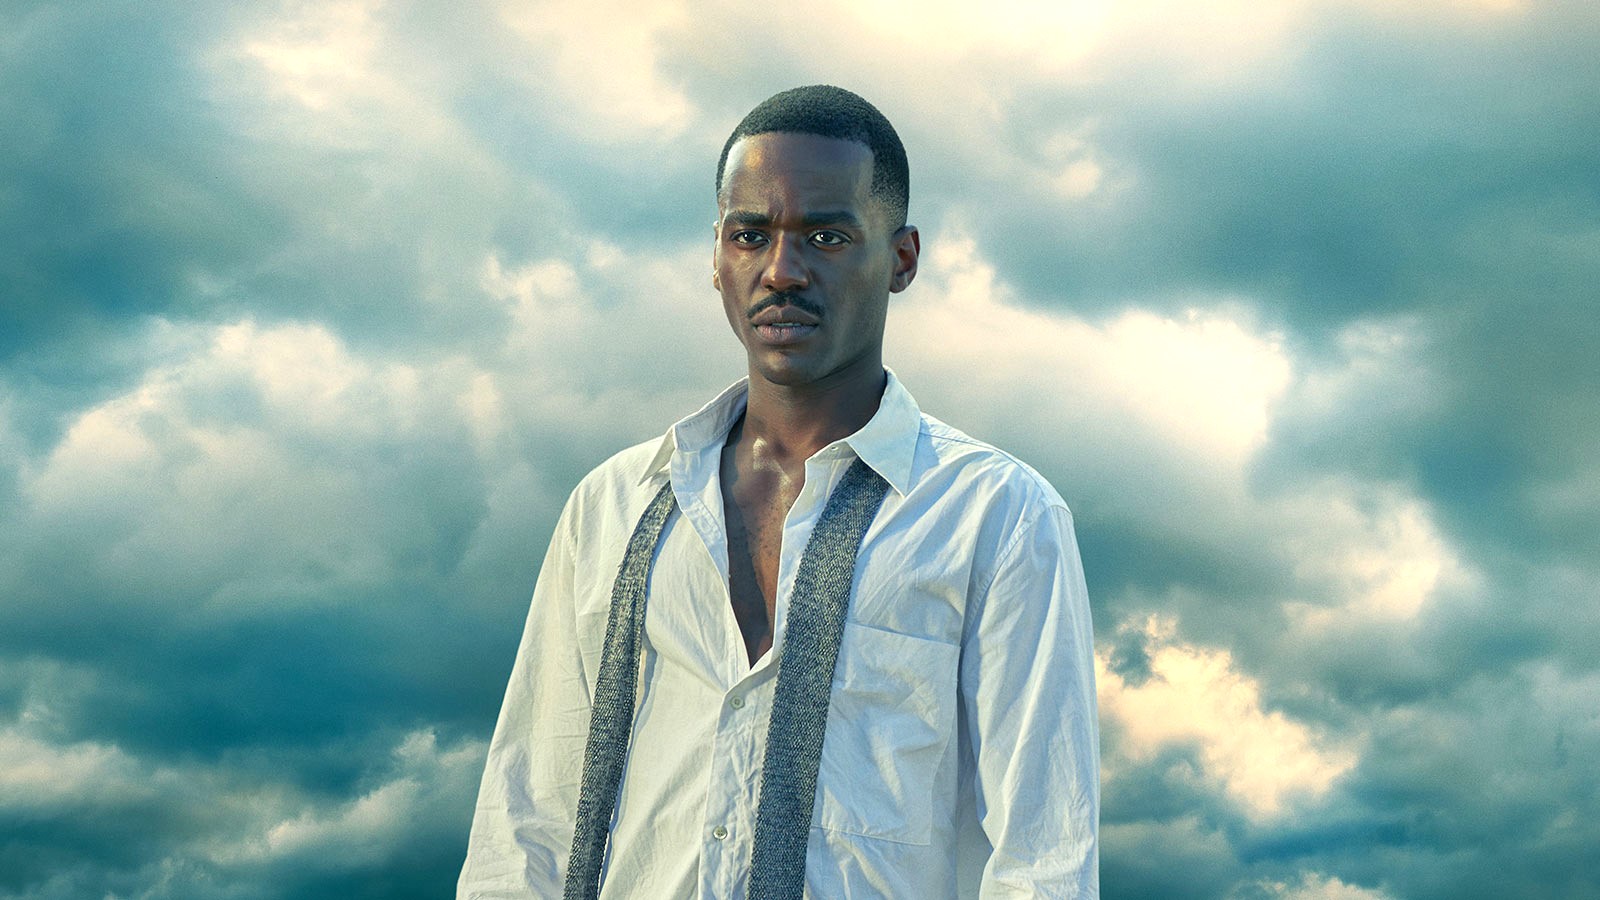 Ncuti Gatwa stands against a cloudy background as the Fifteenth Doctor in 'Doctor Who'